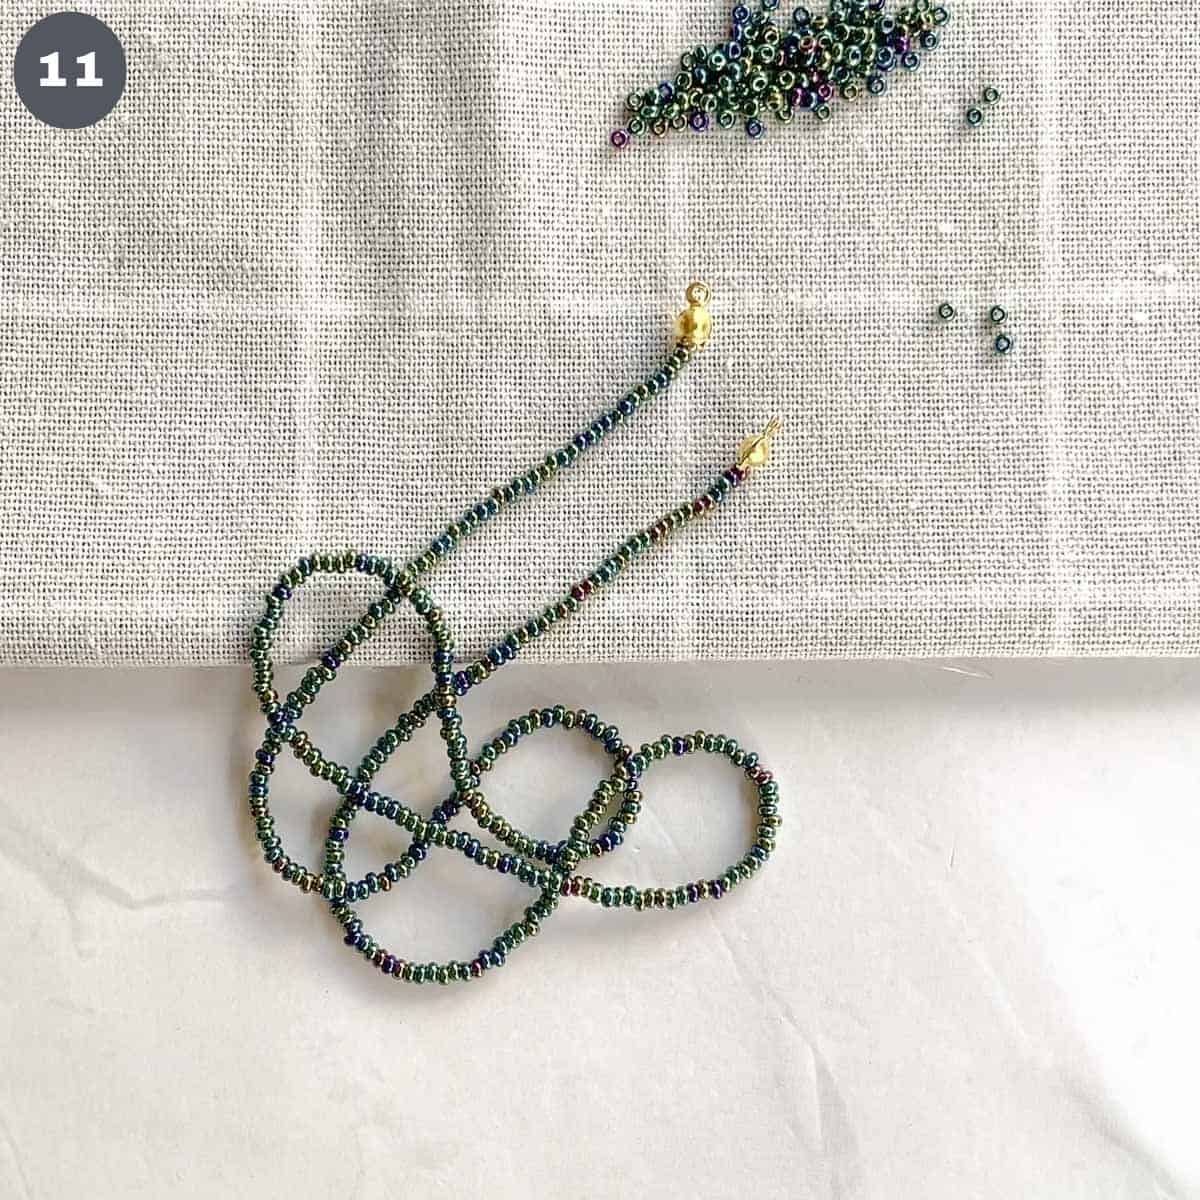 A strand of seed bead necklace.